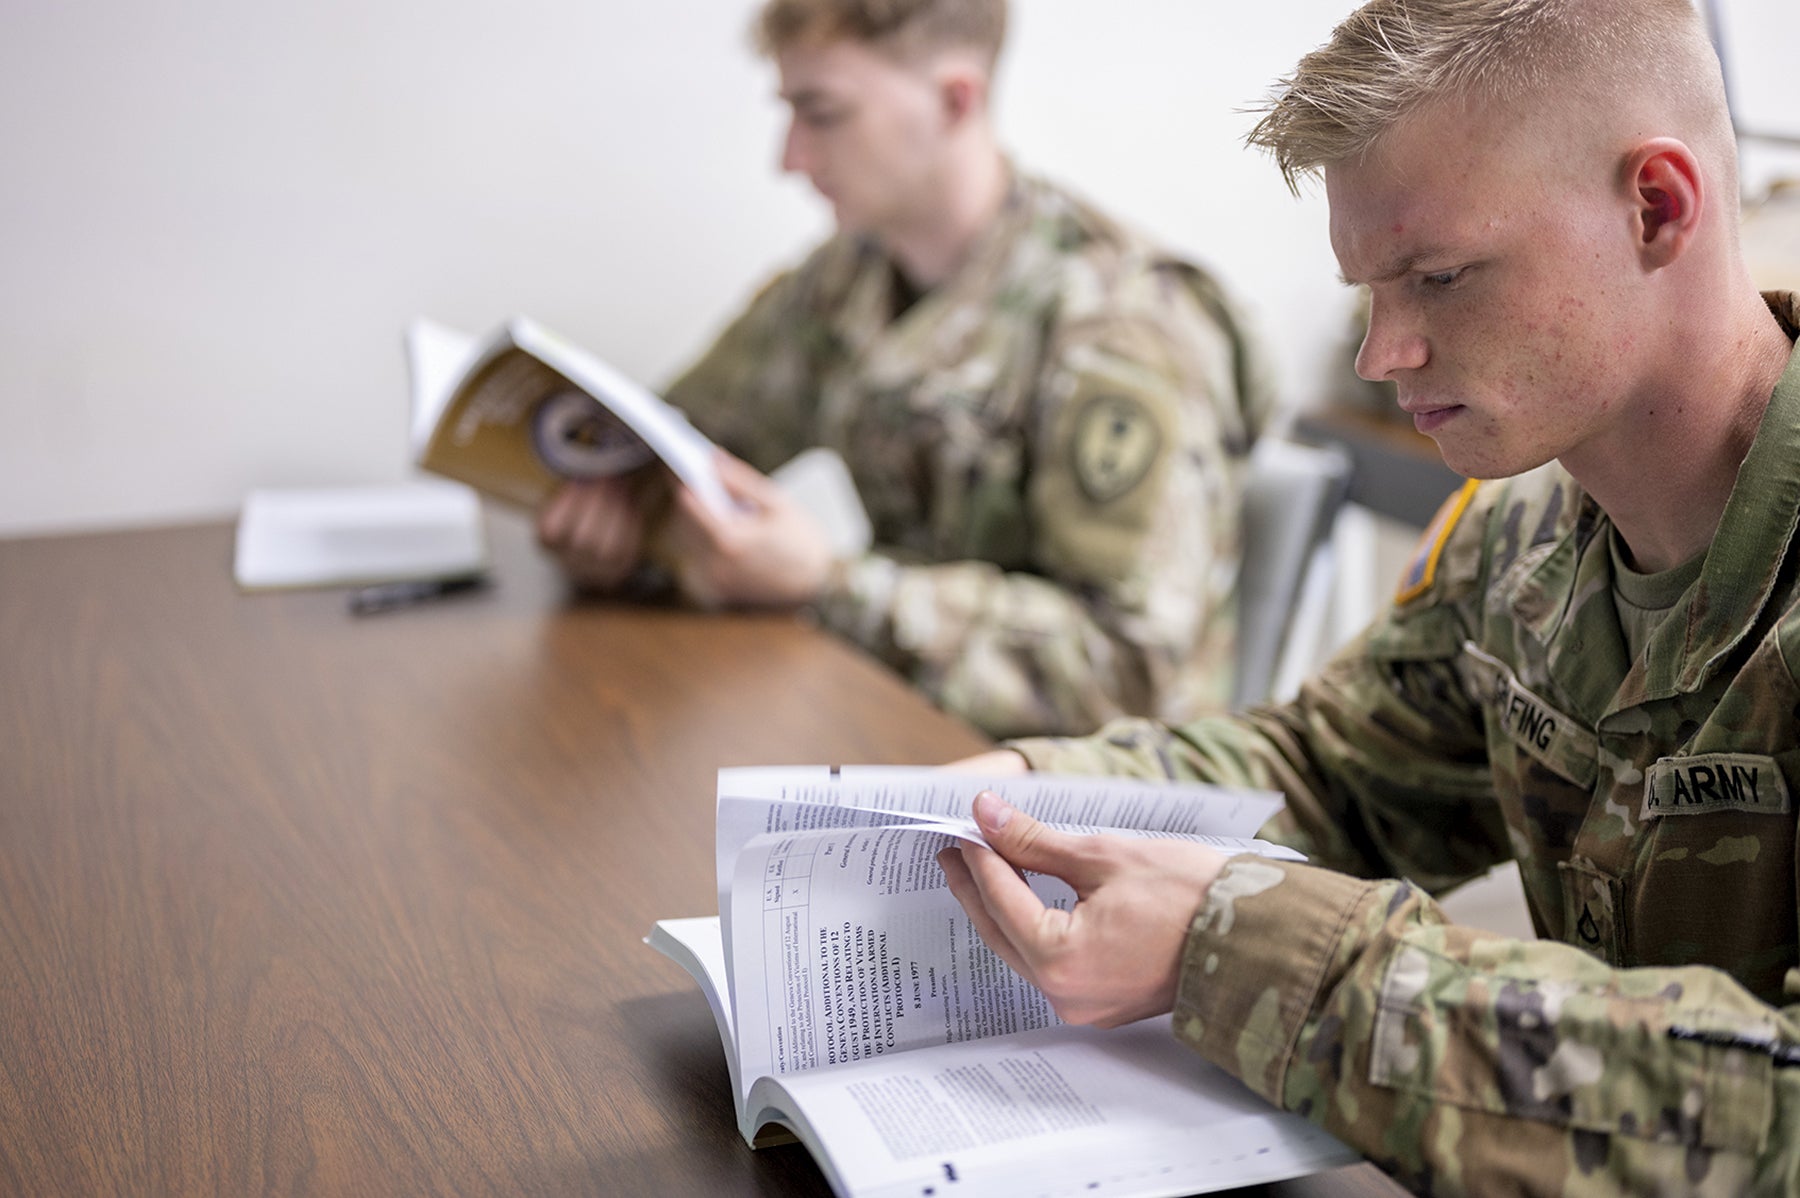 Pfc. Bryce Grafing, right, a paralegal specialist with the U.S. Army Reserve’s 300th Military Police Brigade, 200th Military Police Command, reads instructional material during a class at Fort McCoy, Wisconsin. (Credit: U.S. Army/Staff Sgt. Ryan Rayno)